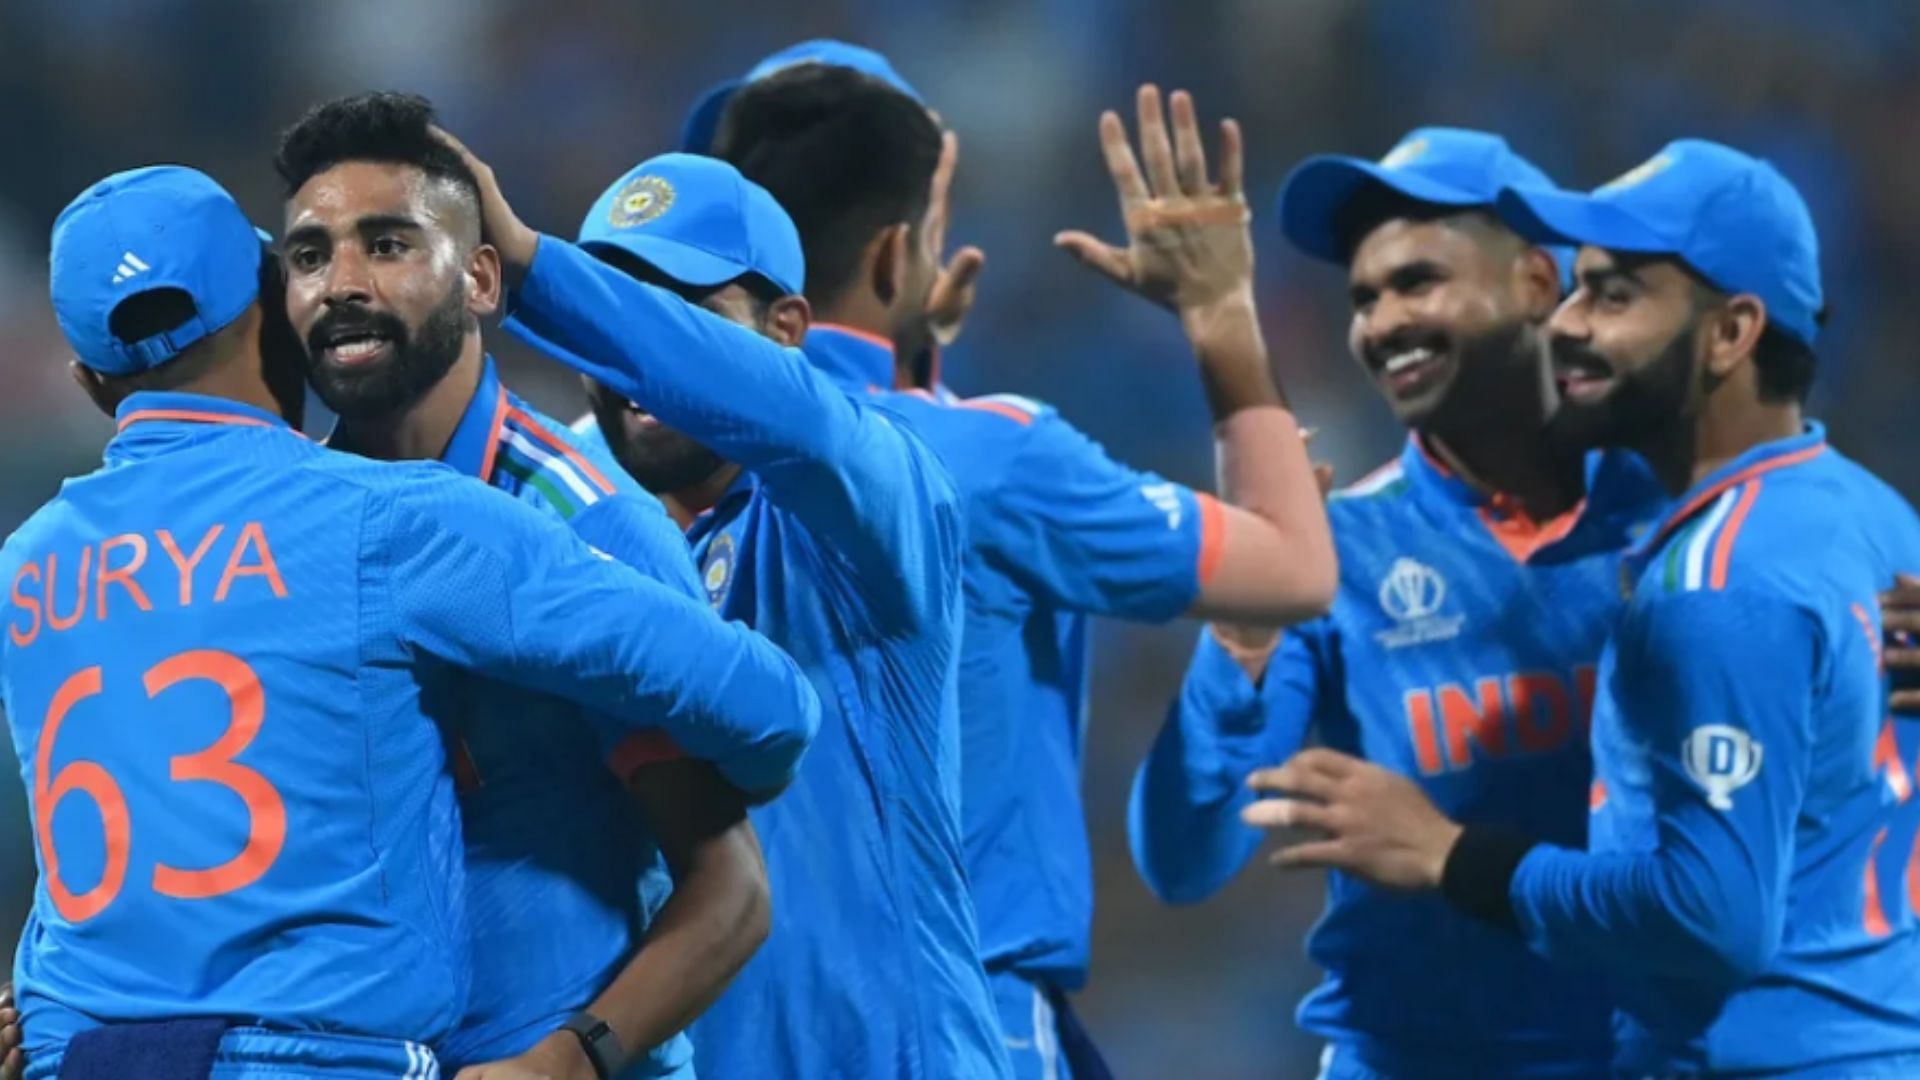 India celebrate after taking a wicket in the match against Sri Lanka. (Pic: Getty)